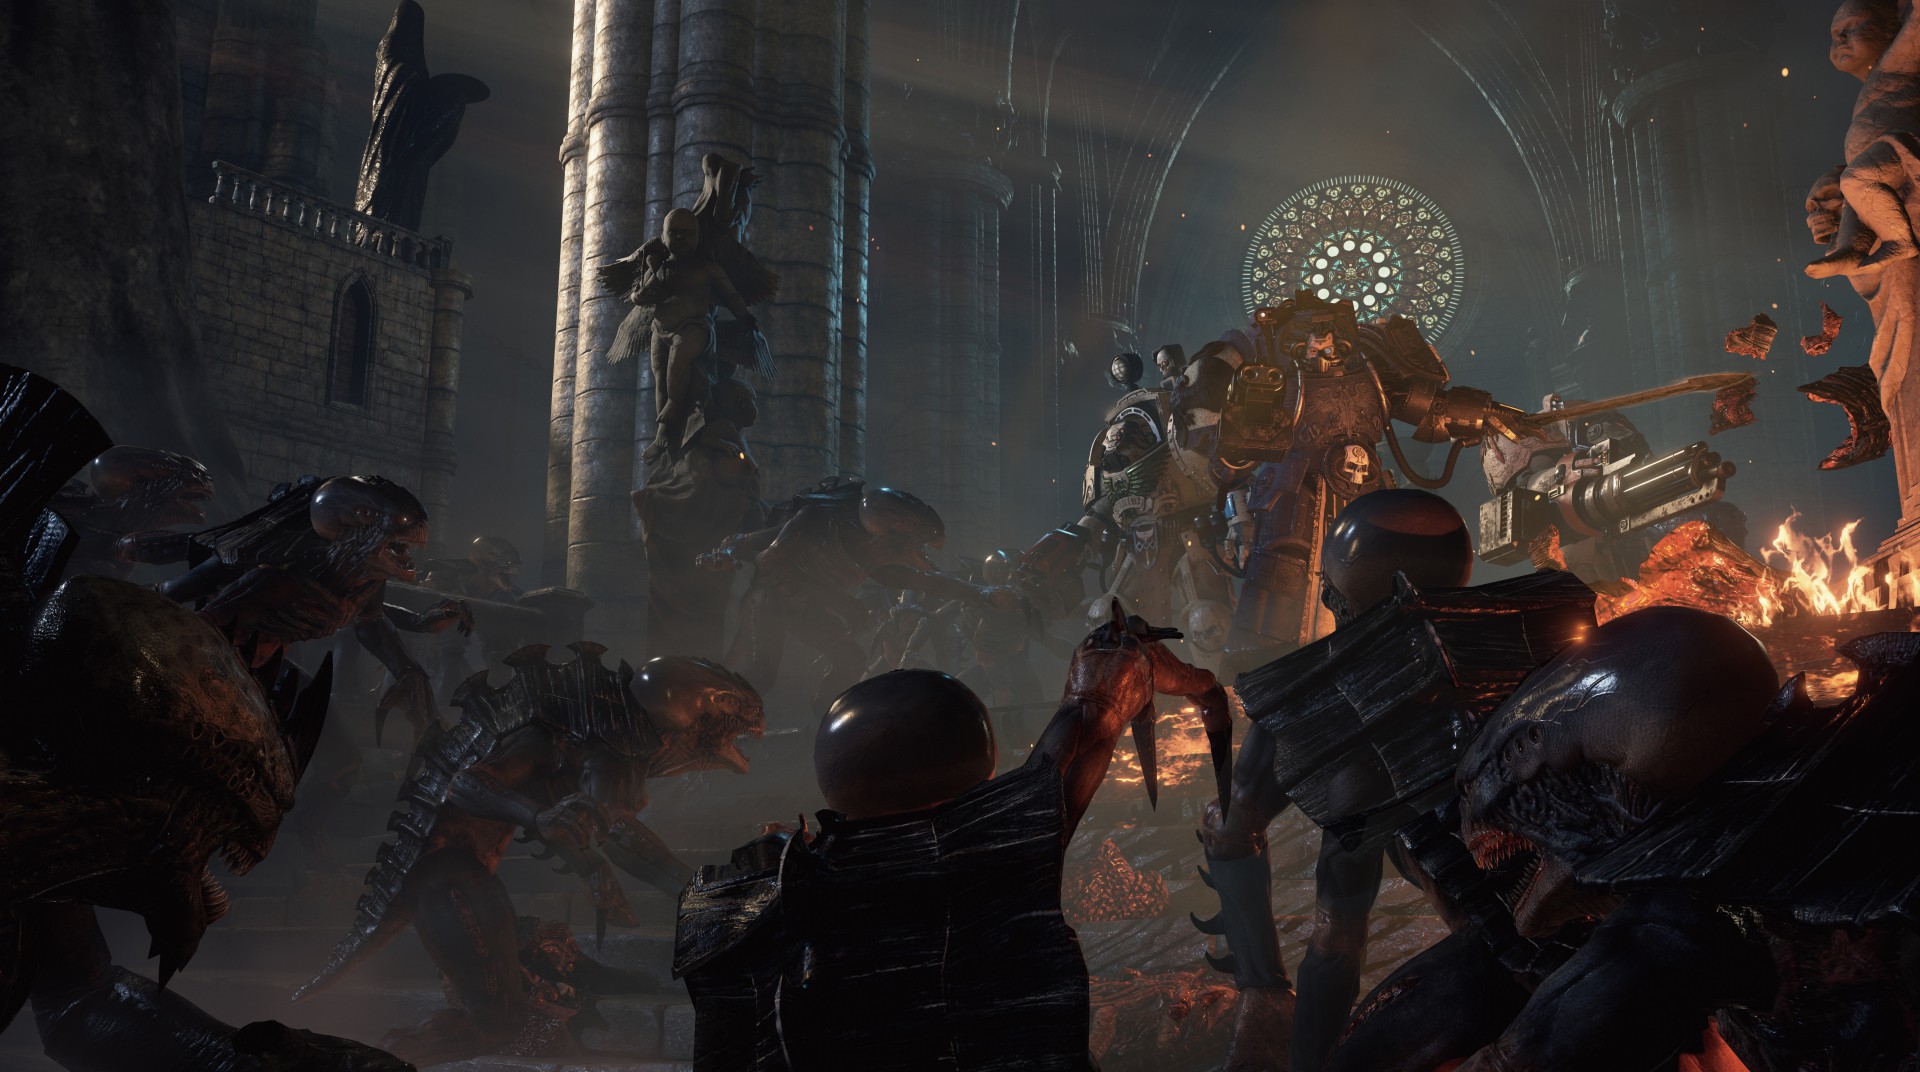 Space Hulk: Deathwing PC Game Review